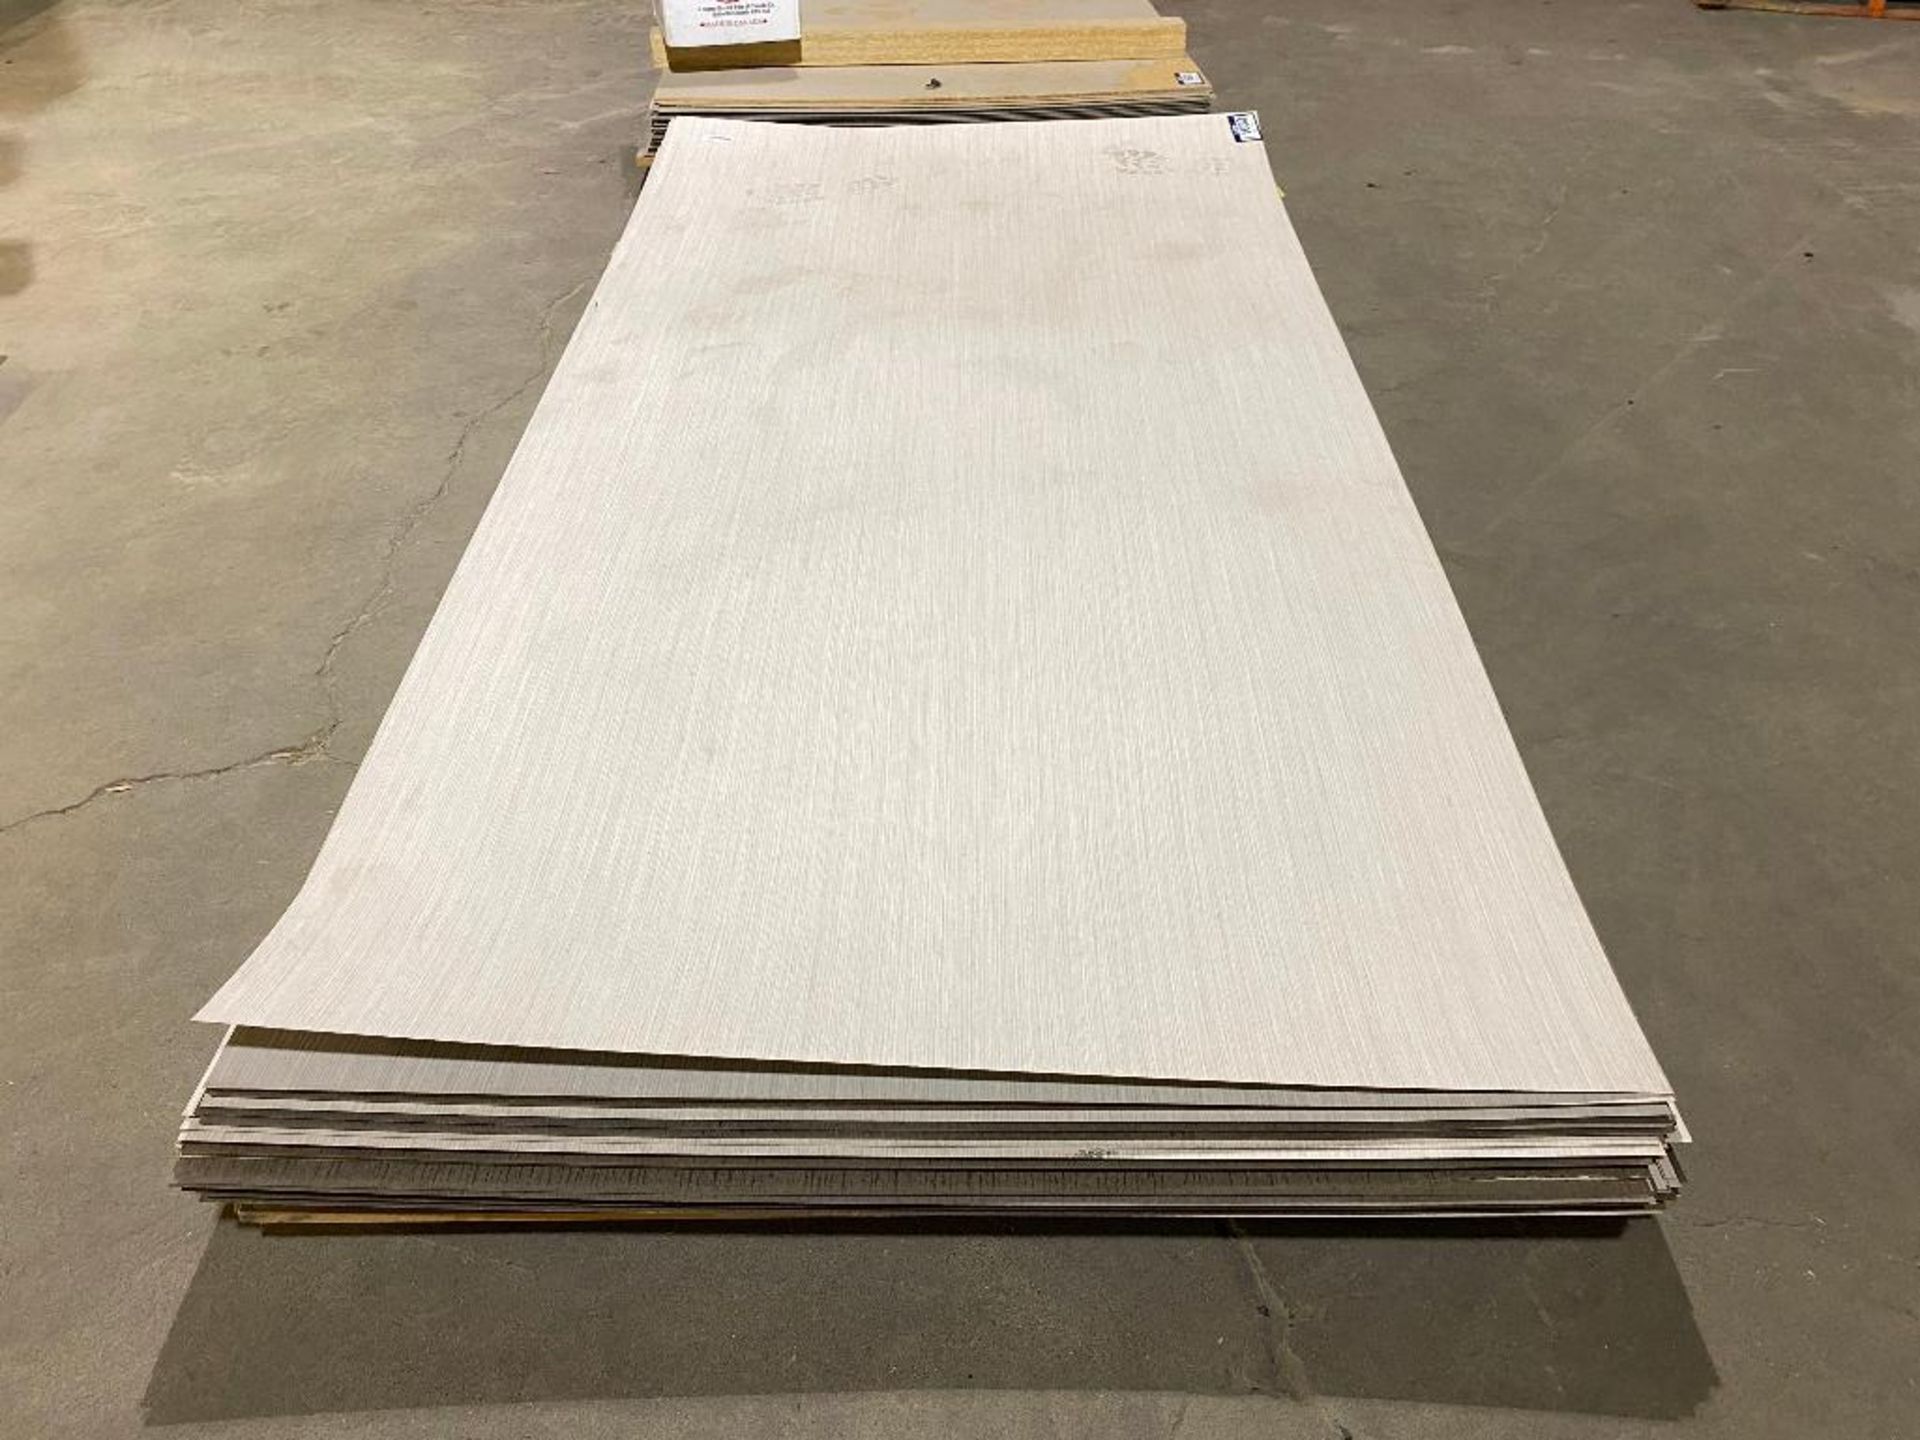 Lot of Asst. 4' X 8' Laminate - Image 3 of 3